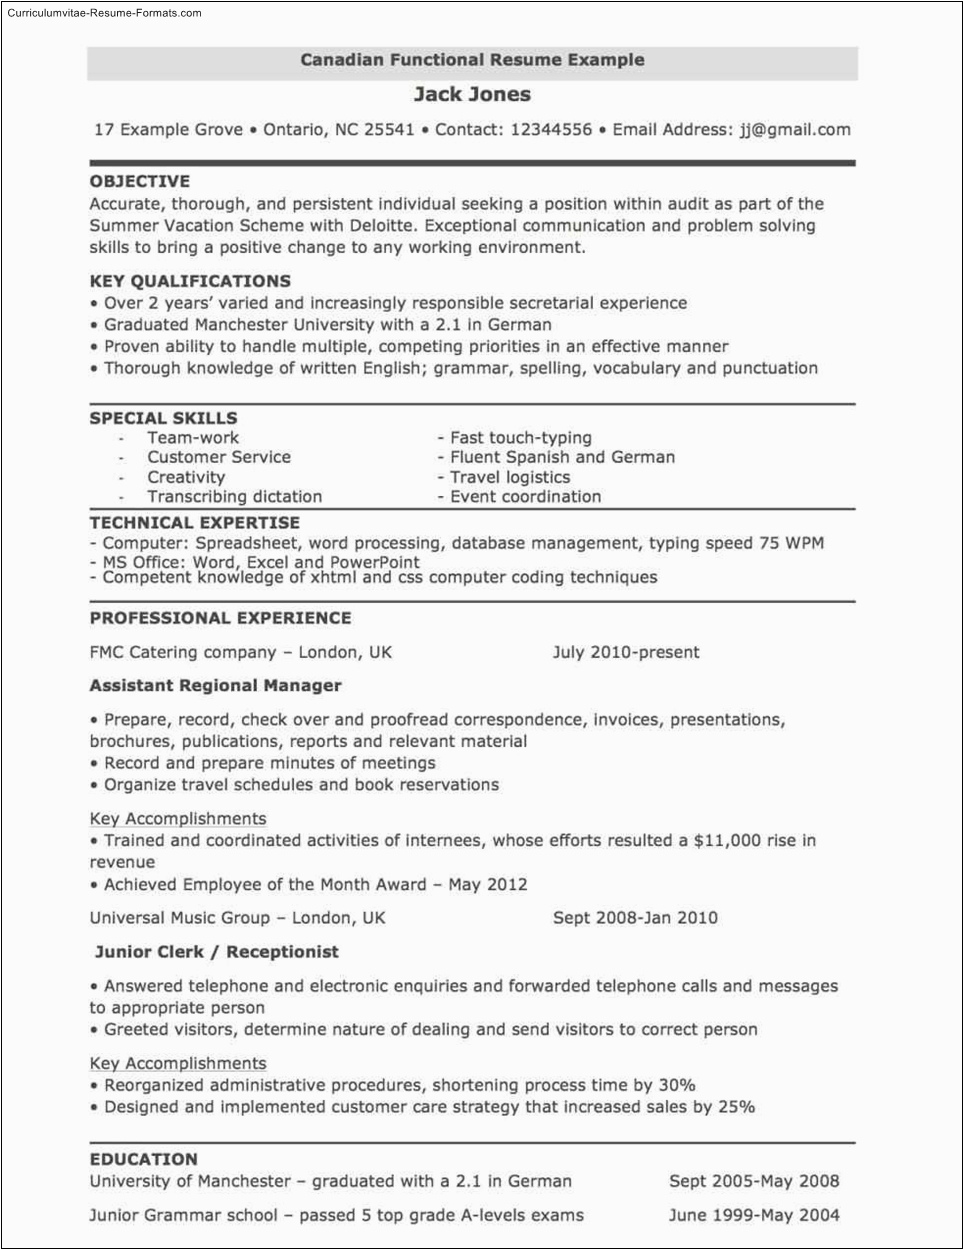 Sample Resume for Job Application In Canada Canada Resume Template